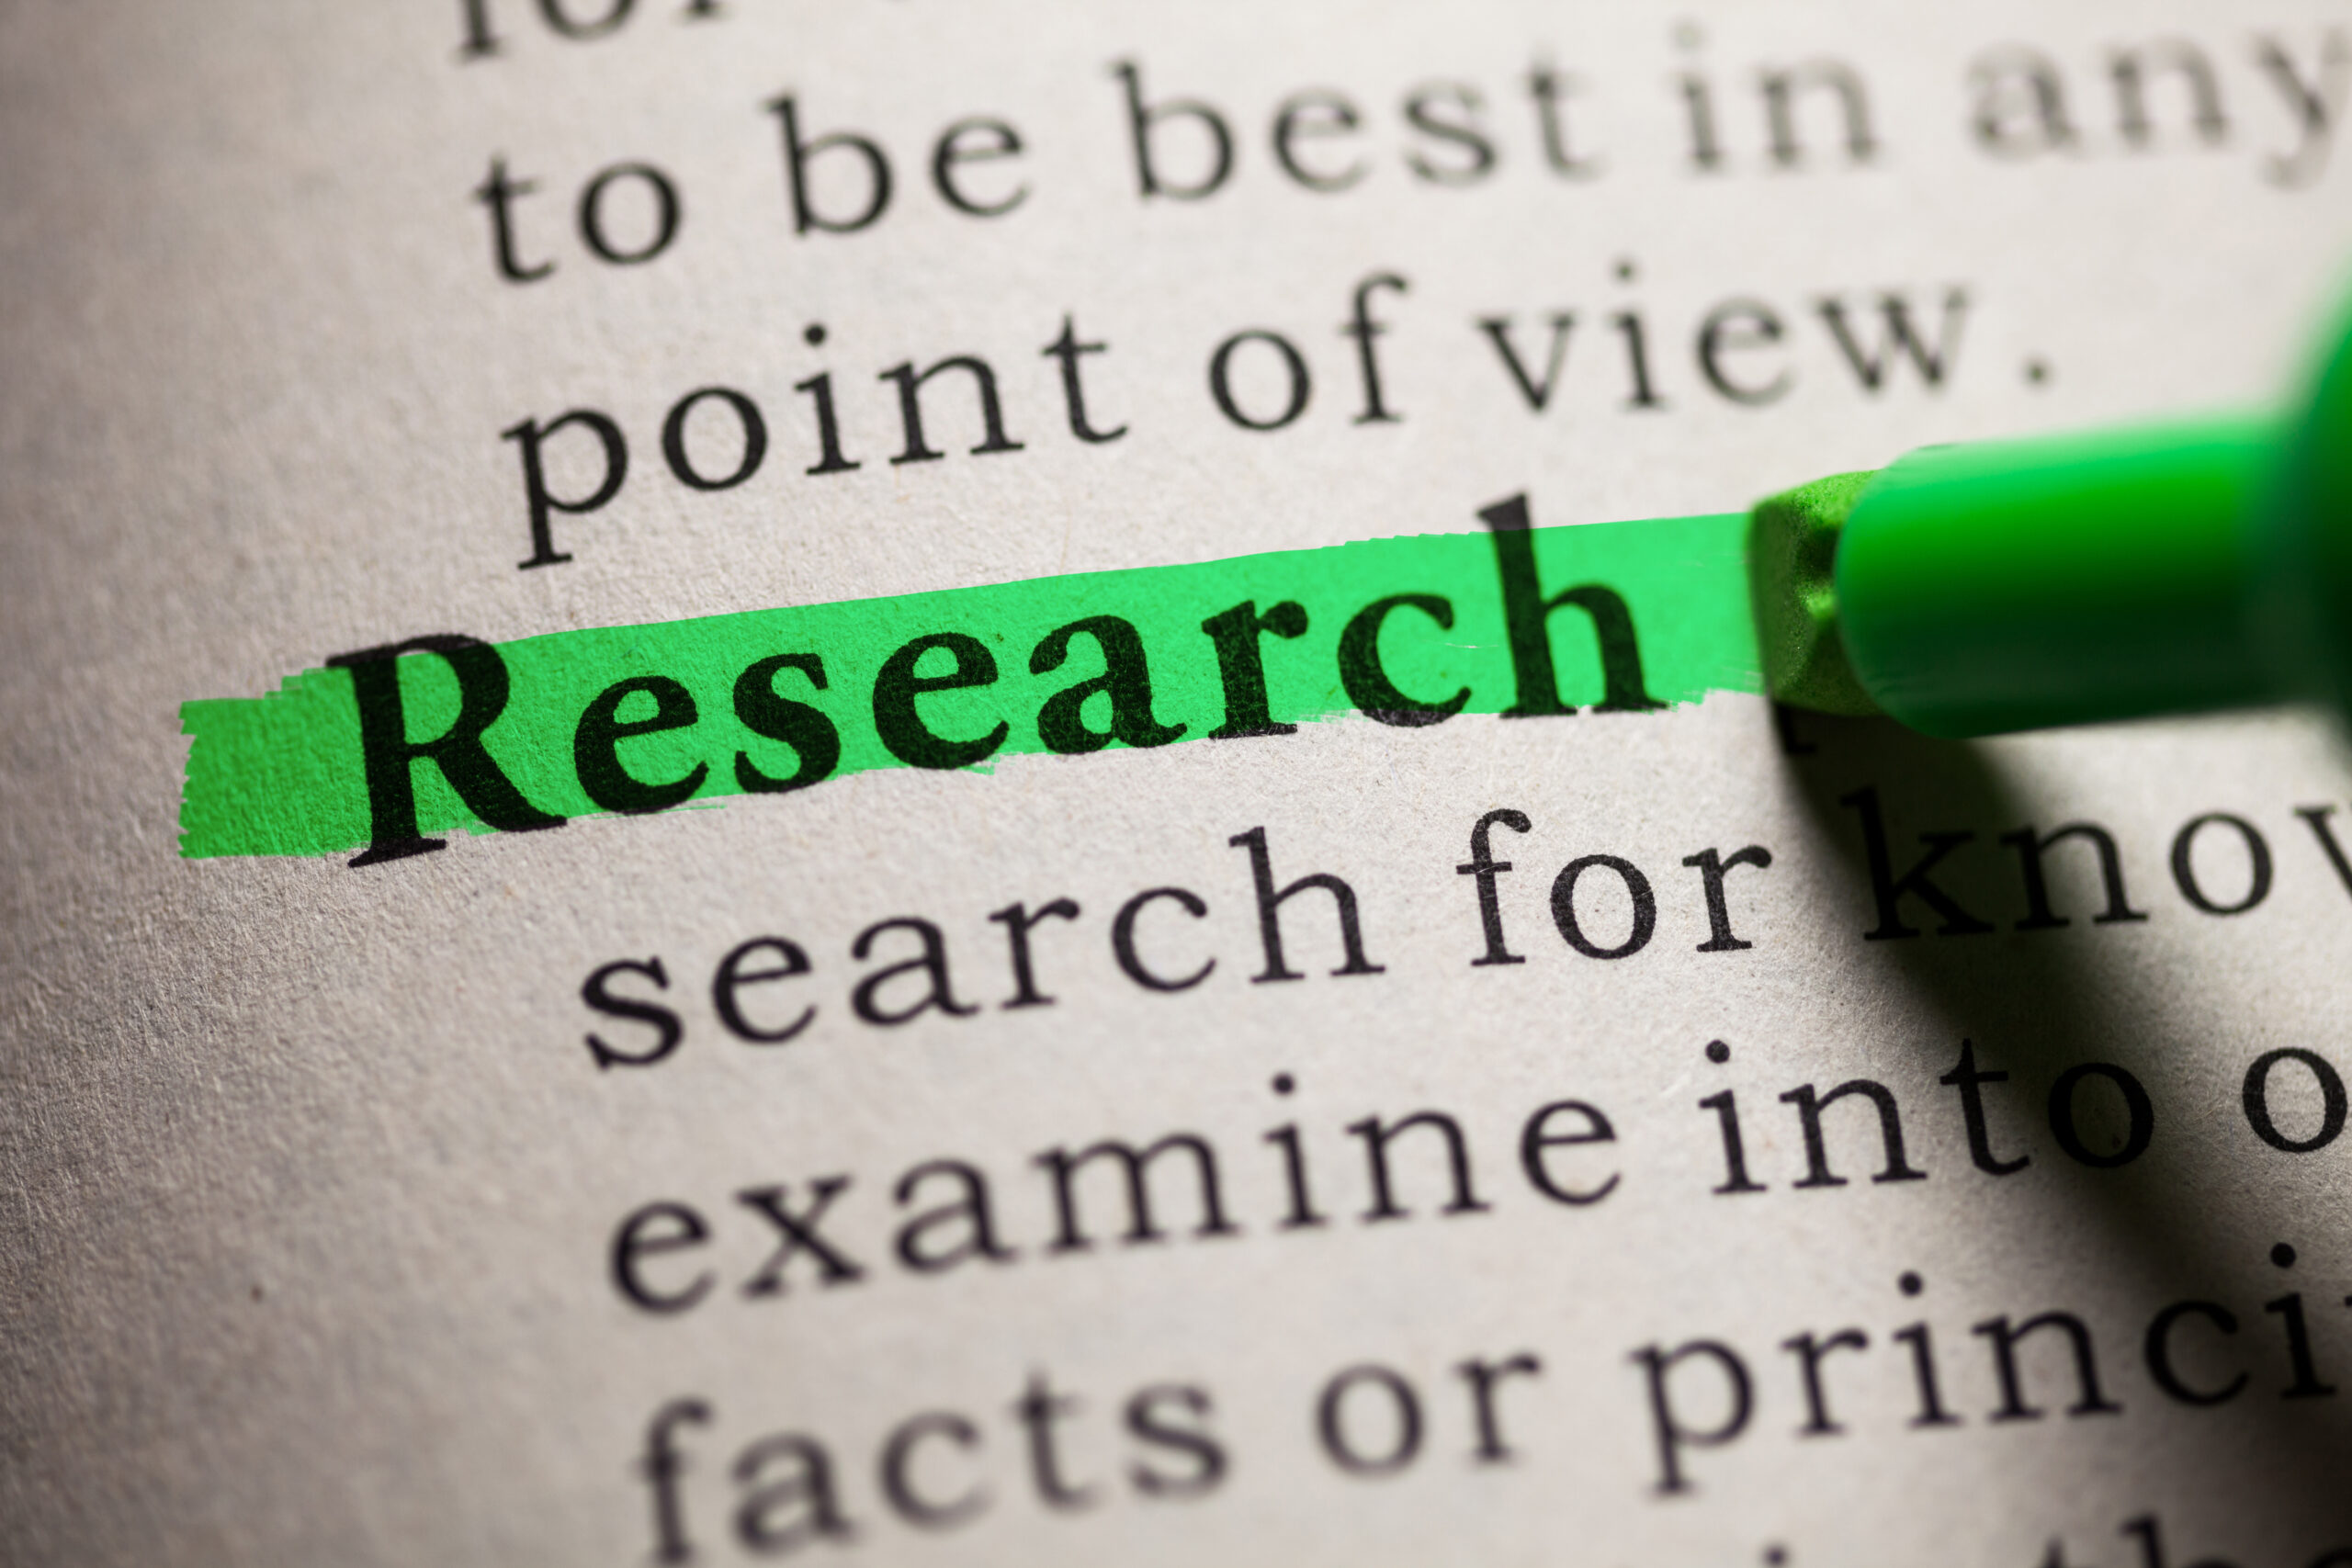 Research-highlighted-in-green-on-page-of-other-unhighlighted-words